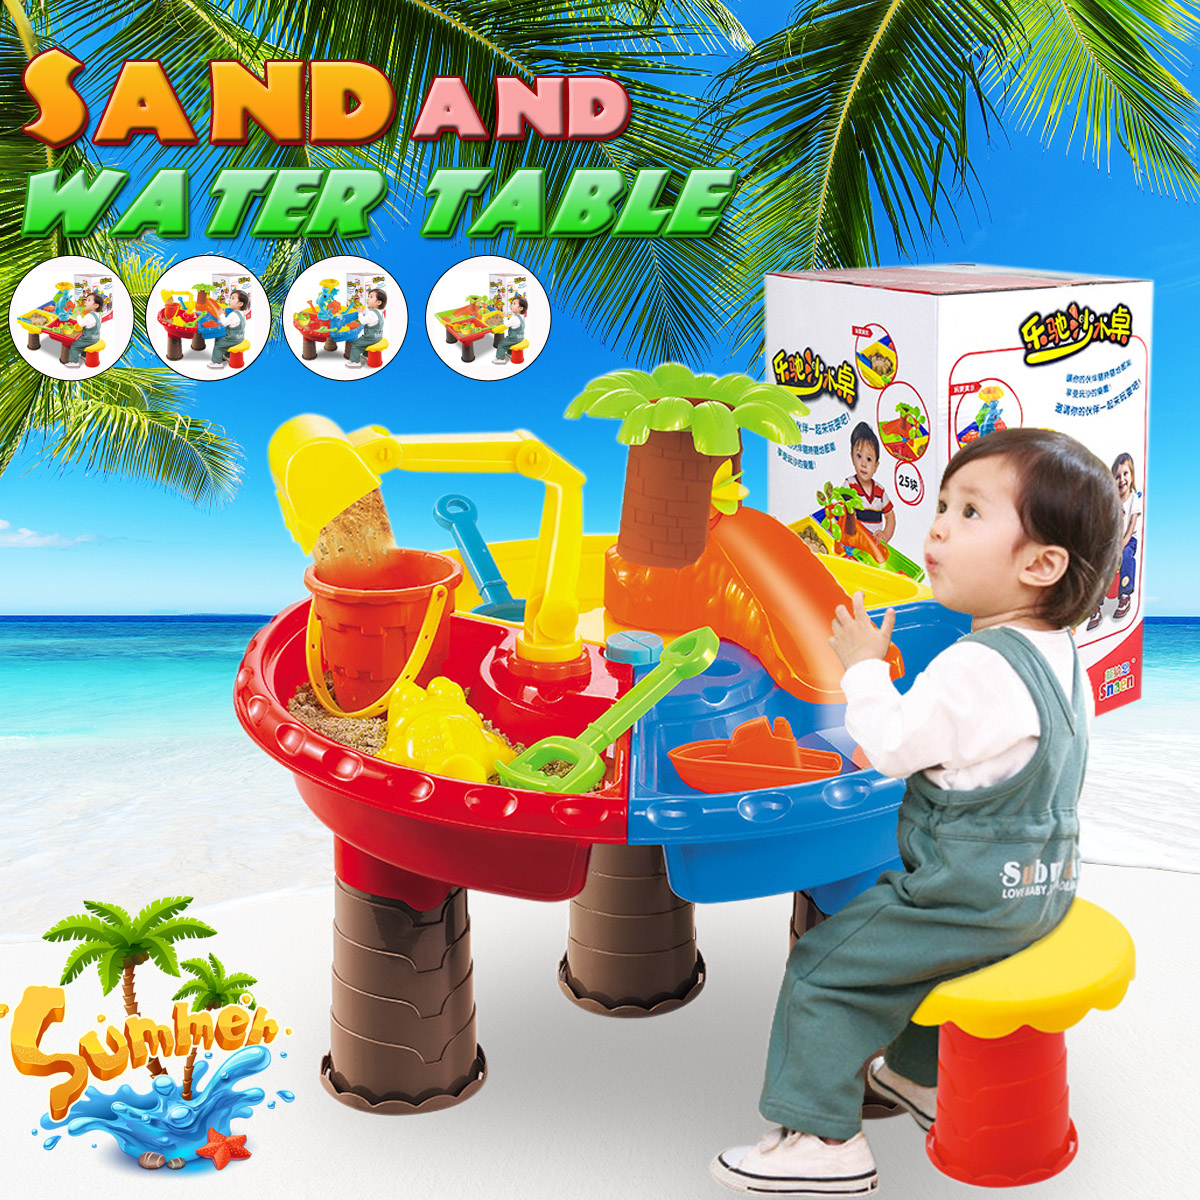 2-IN-1-Multi-style-Summer-Beach-Sand-Kids-Play-Water-Digging-Sandglass-Play-Sand-Tool-Set-Toys-for-K-1699507-1